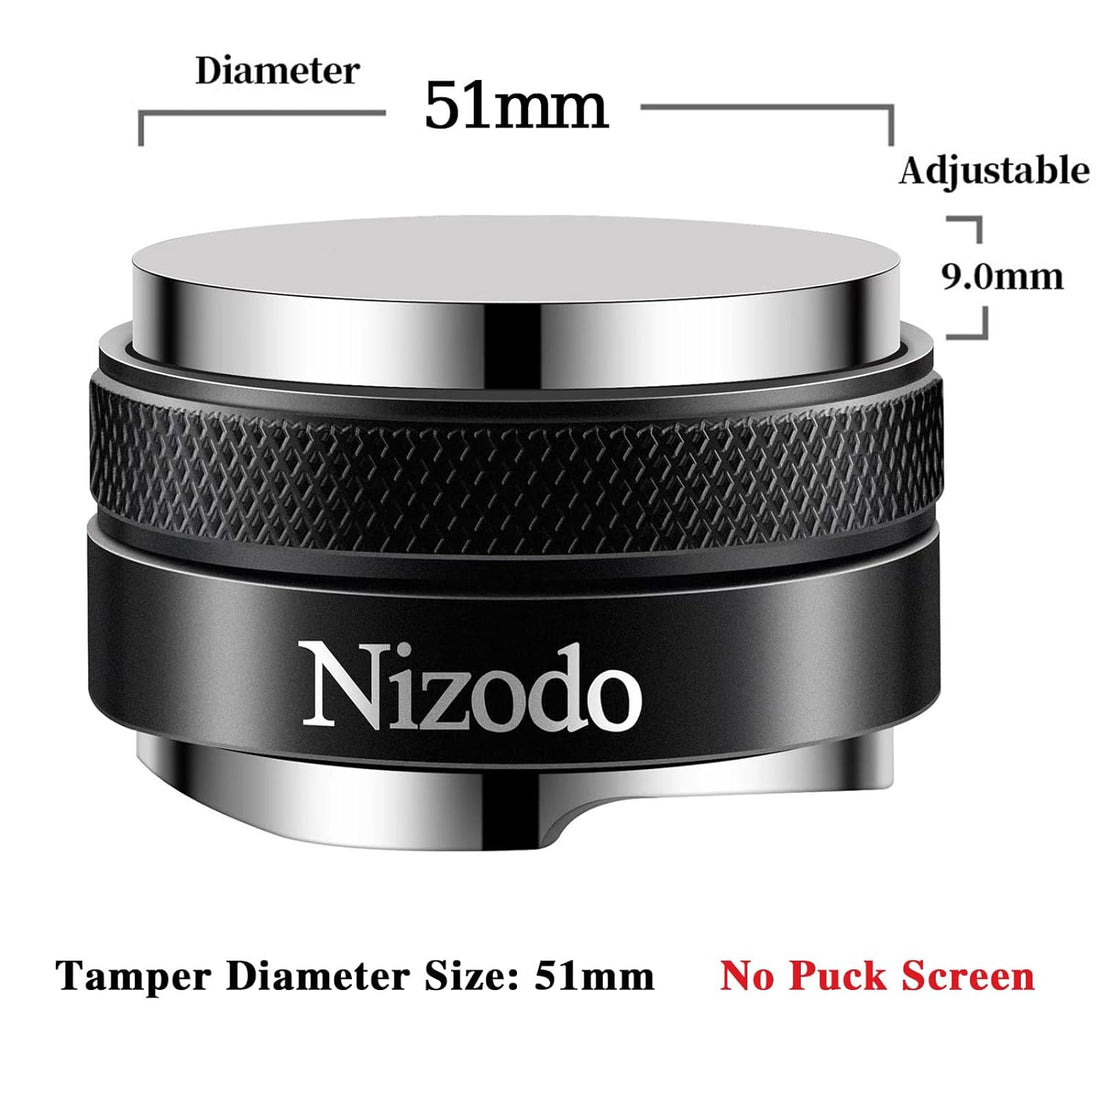 Espresso Coffee Tamper with Puck Screen, Nizodo 51mm Coffee Distributor and Tamper Dual Head Coffee Leveler Adjustable Depth Fits for 51mm Portafilter, Espresso Hand Tampers Accessories